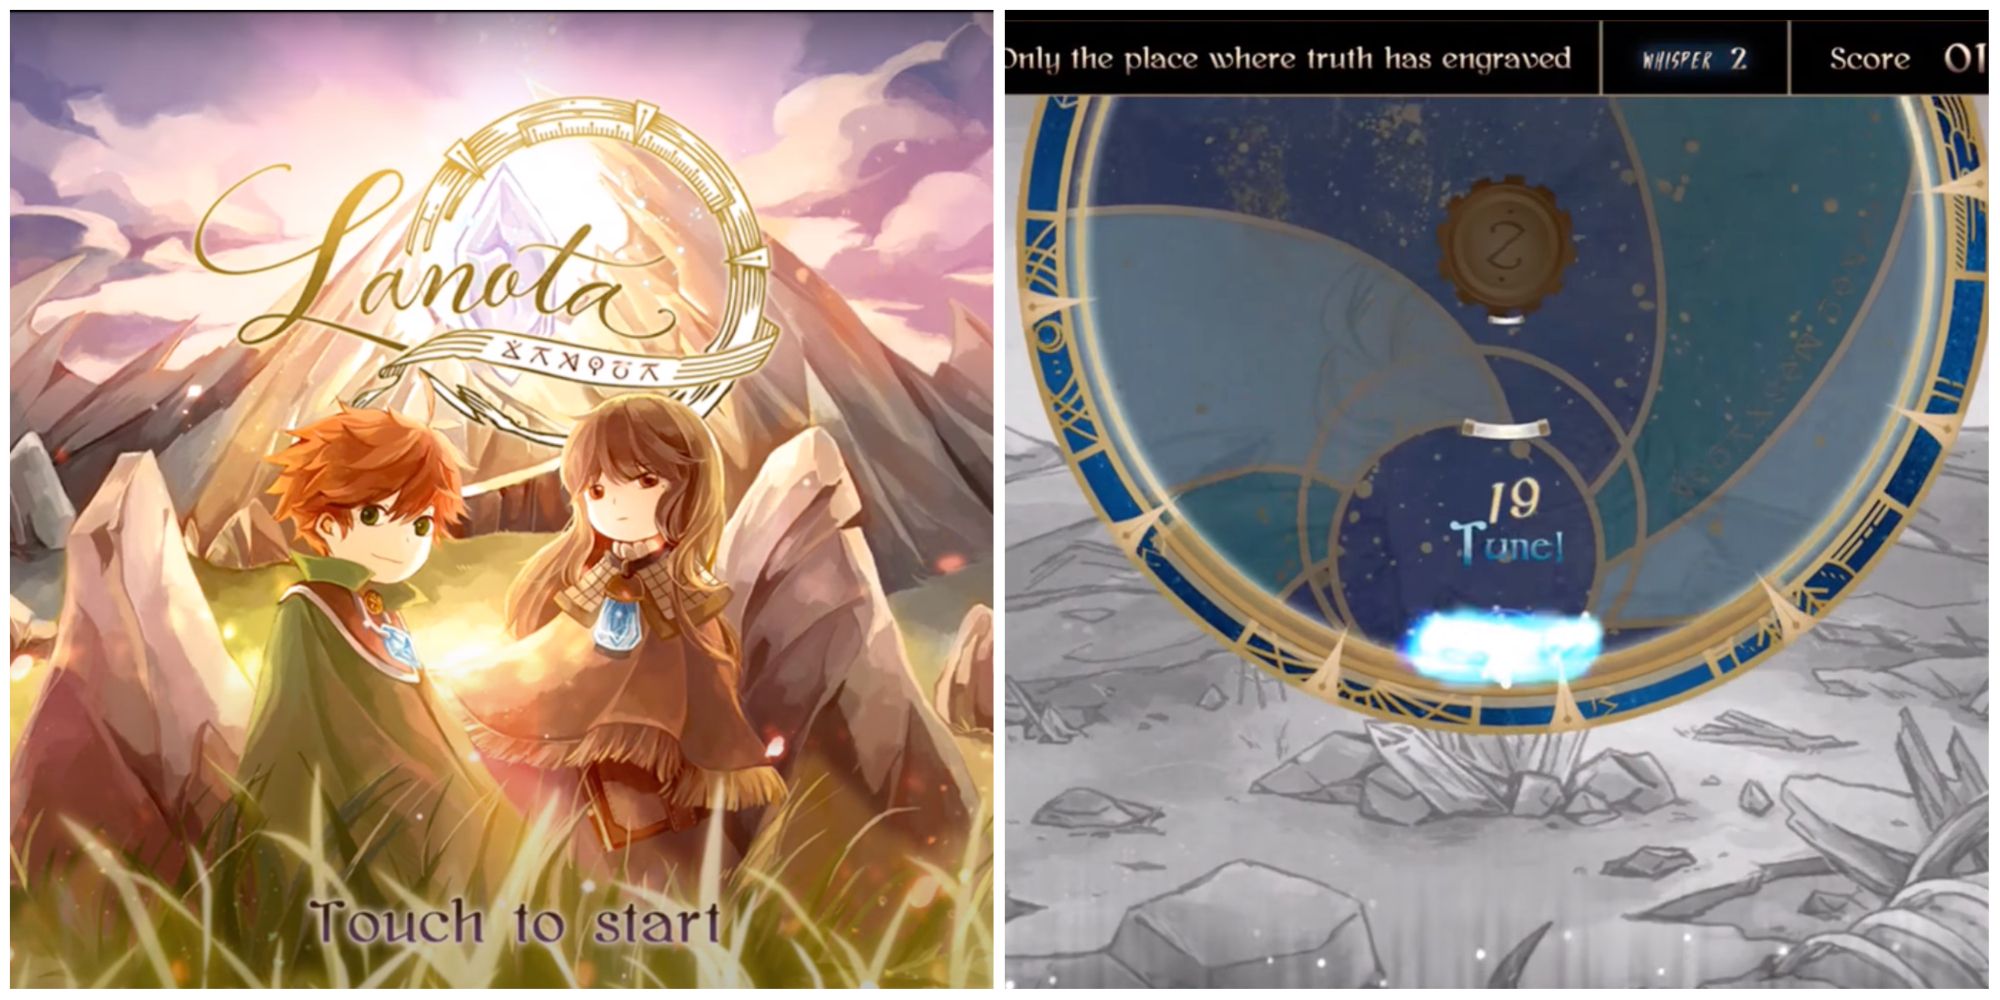 Lanota - Narrative rhythm games: title screen on left, gameplay circle on right